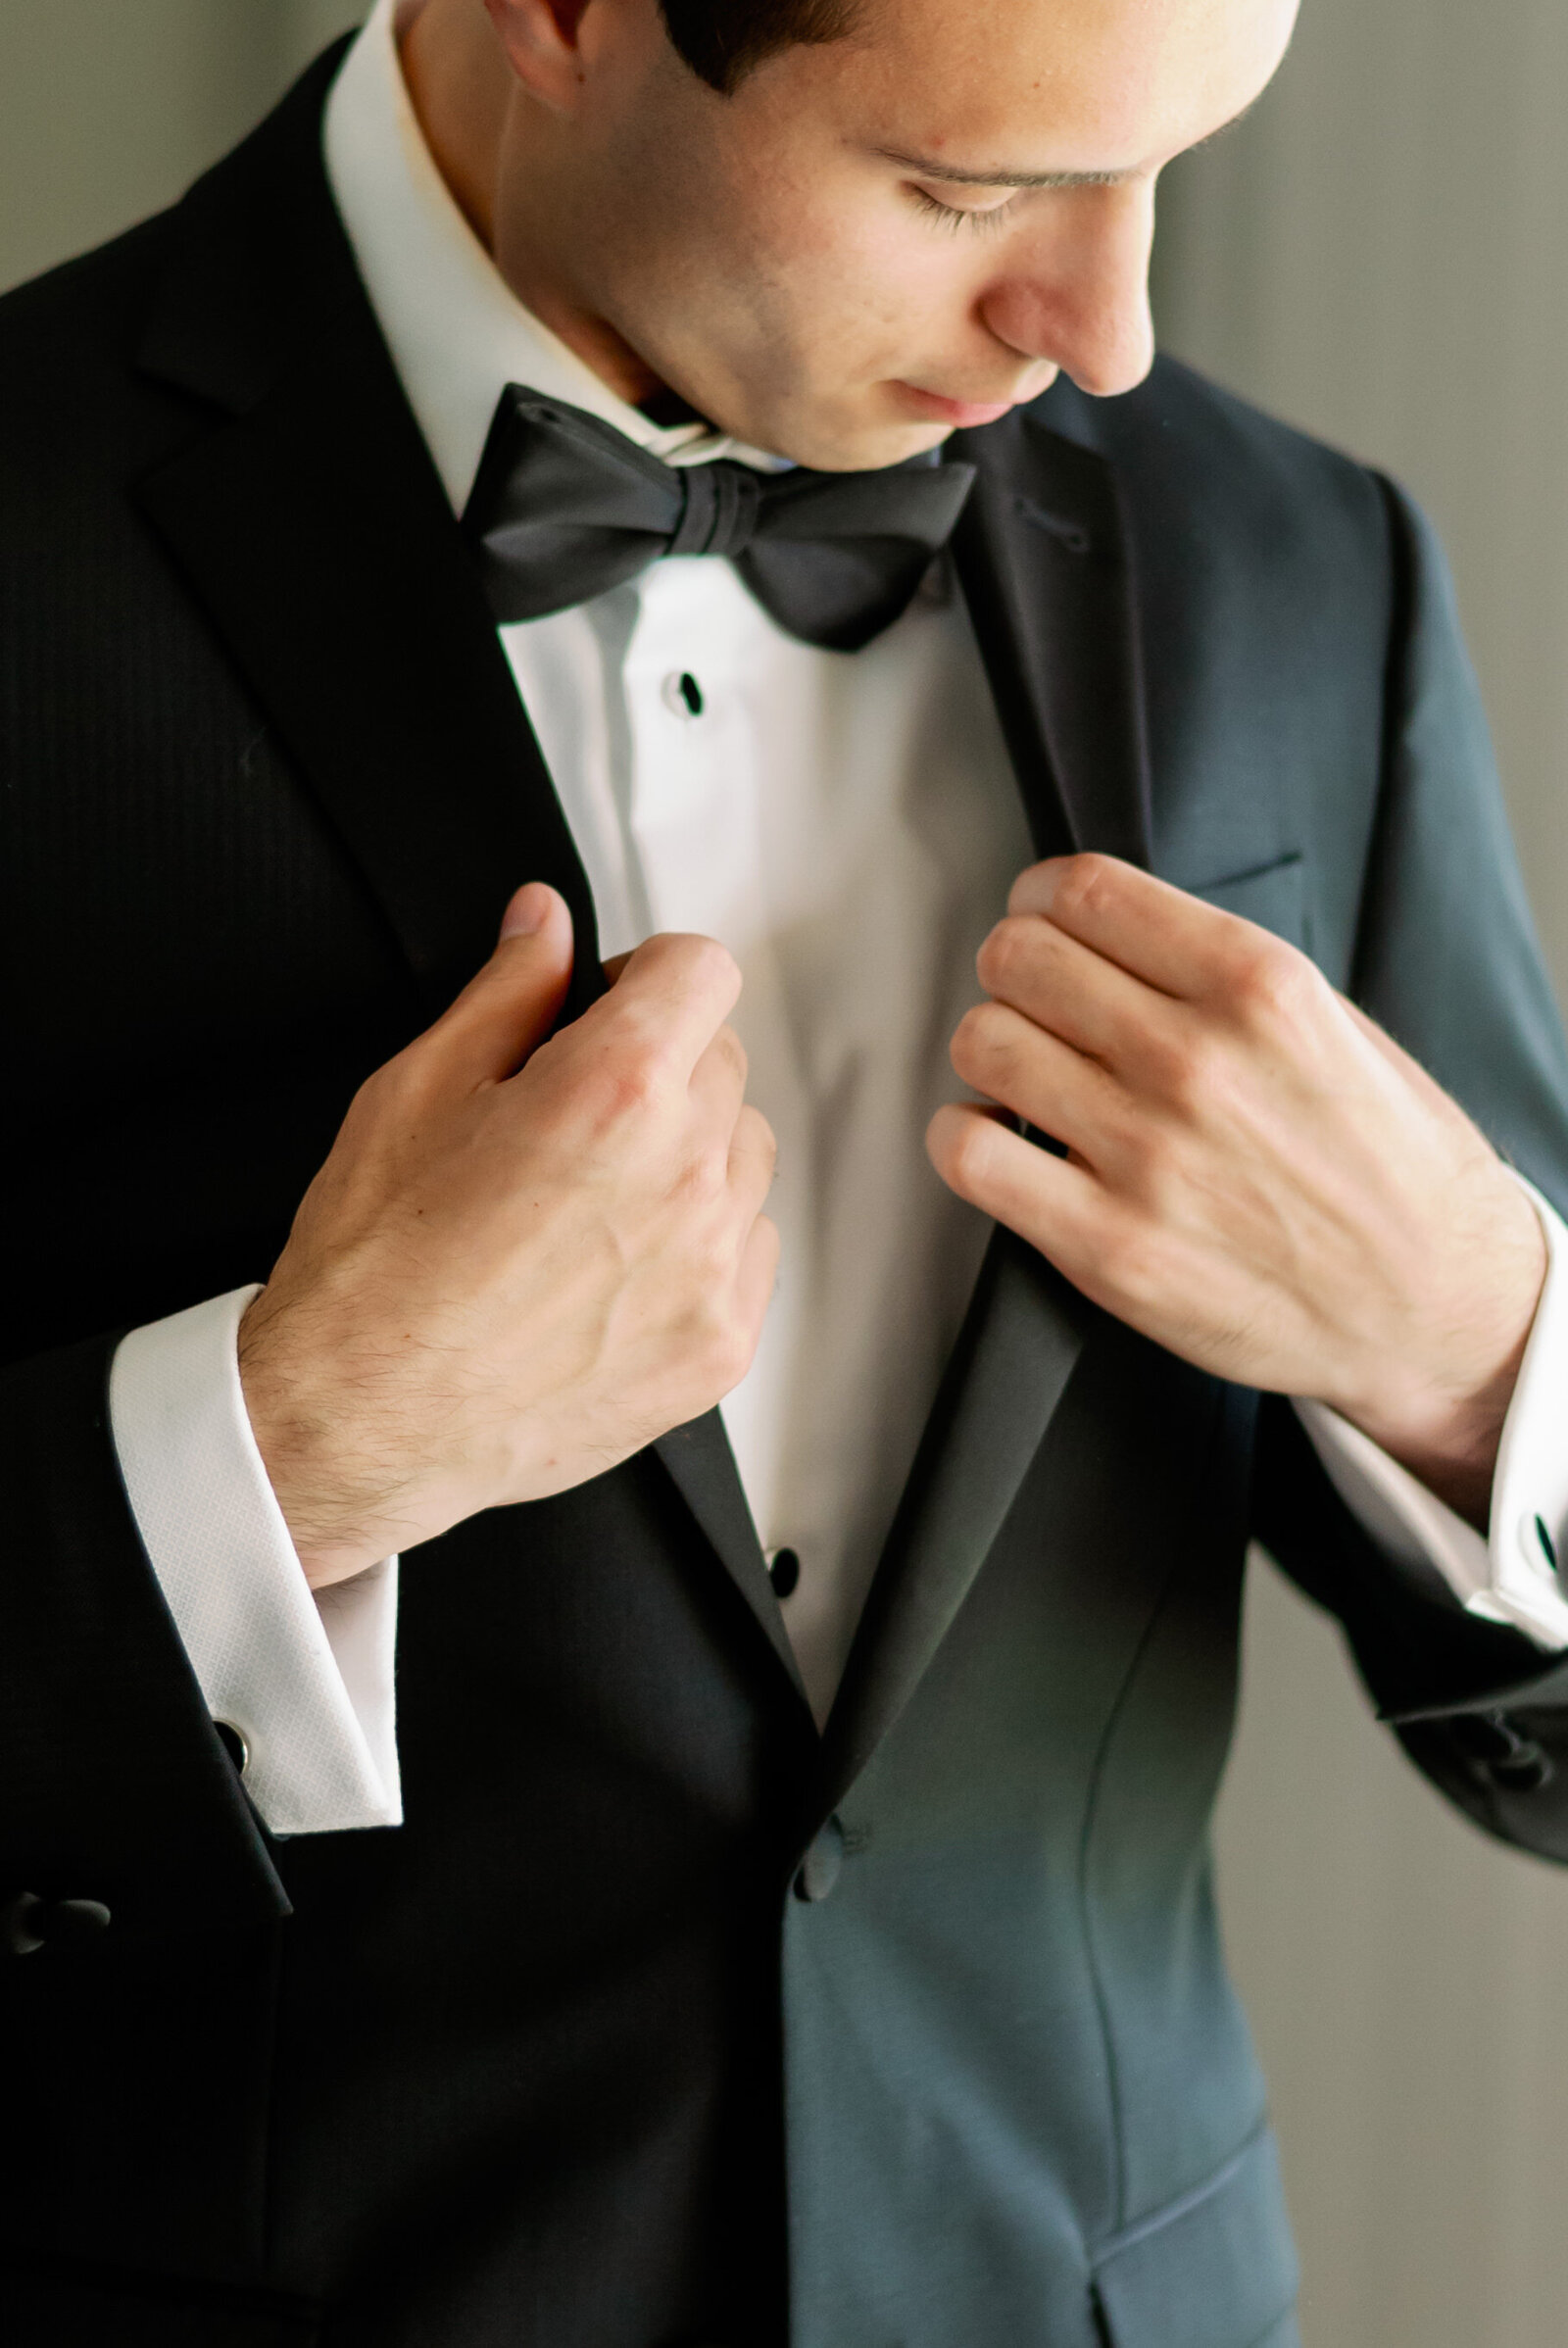 Groom adjusting his tuxedo jacket lapels while looking down toward his hands